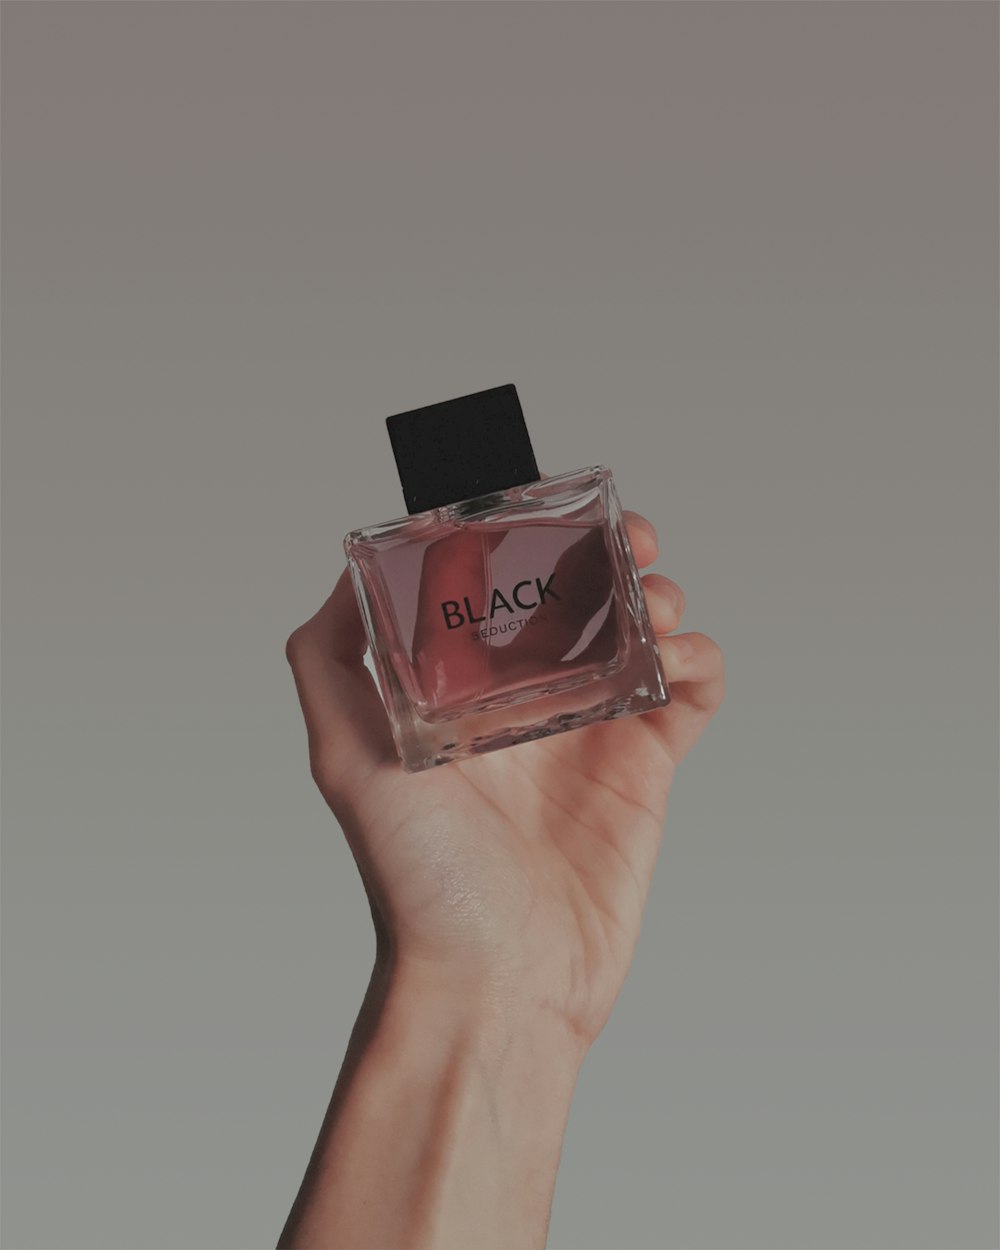 a hand holding a bottle of black perfume